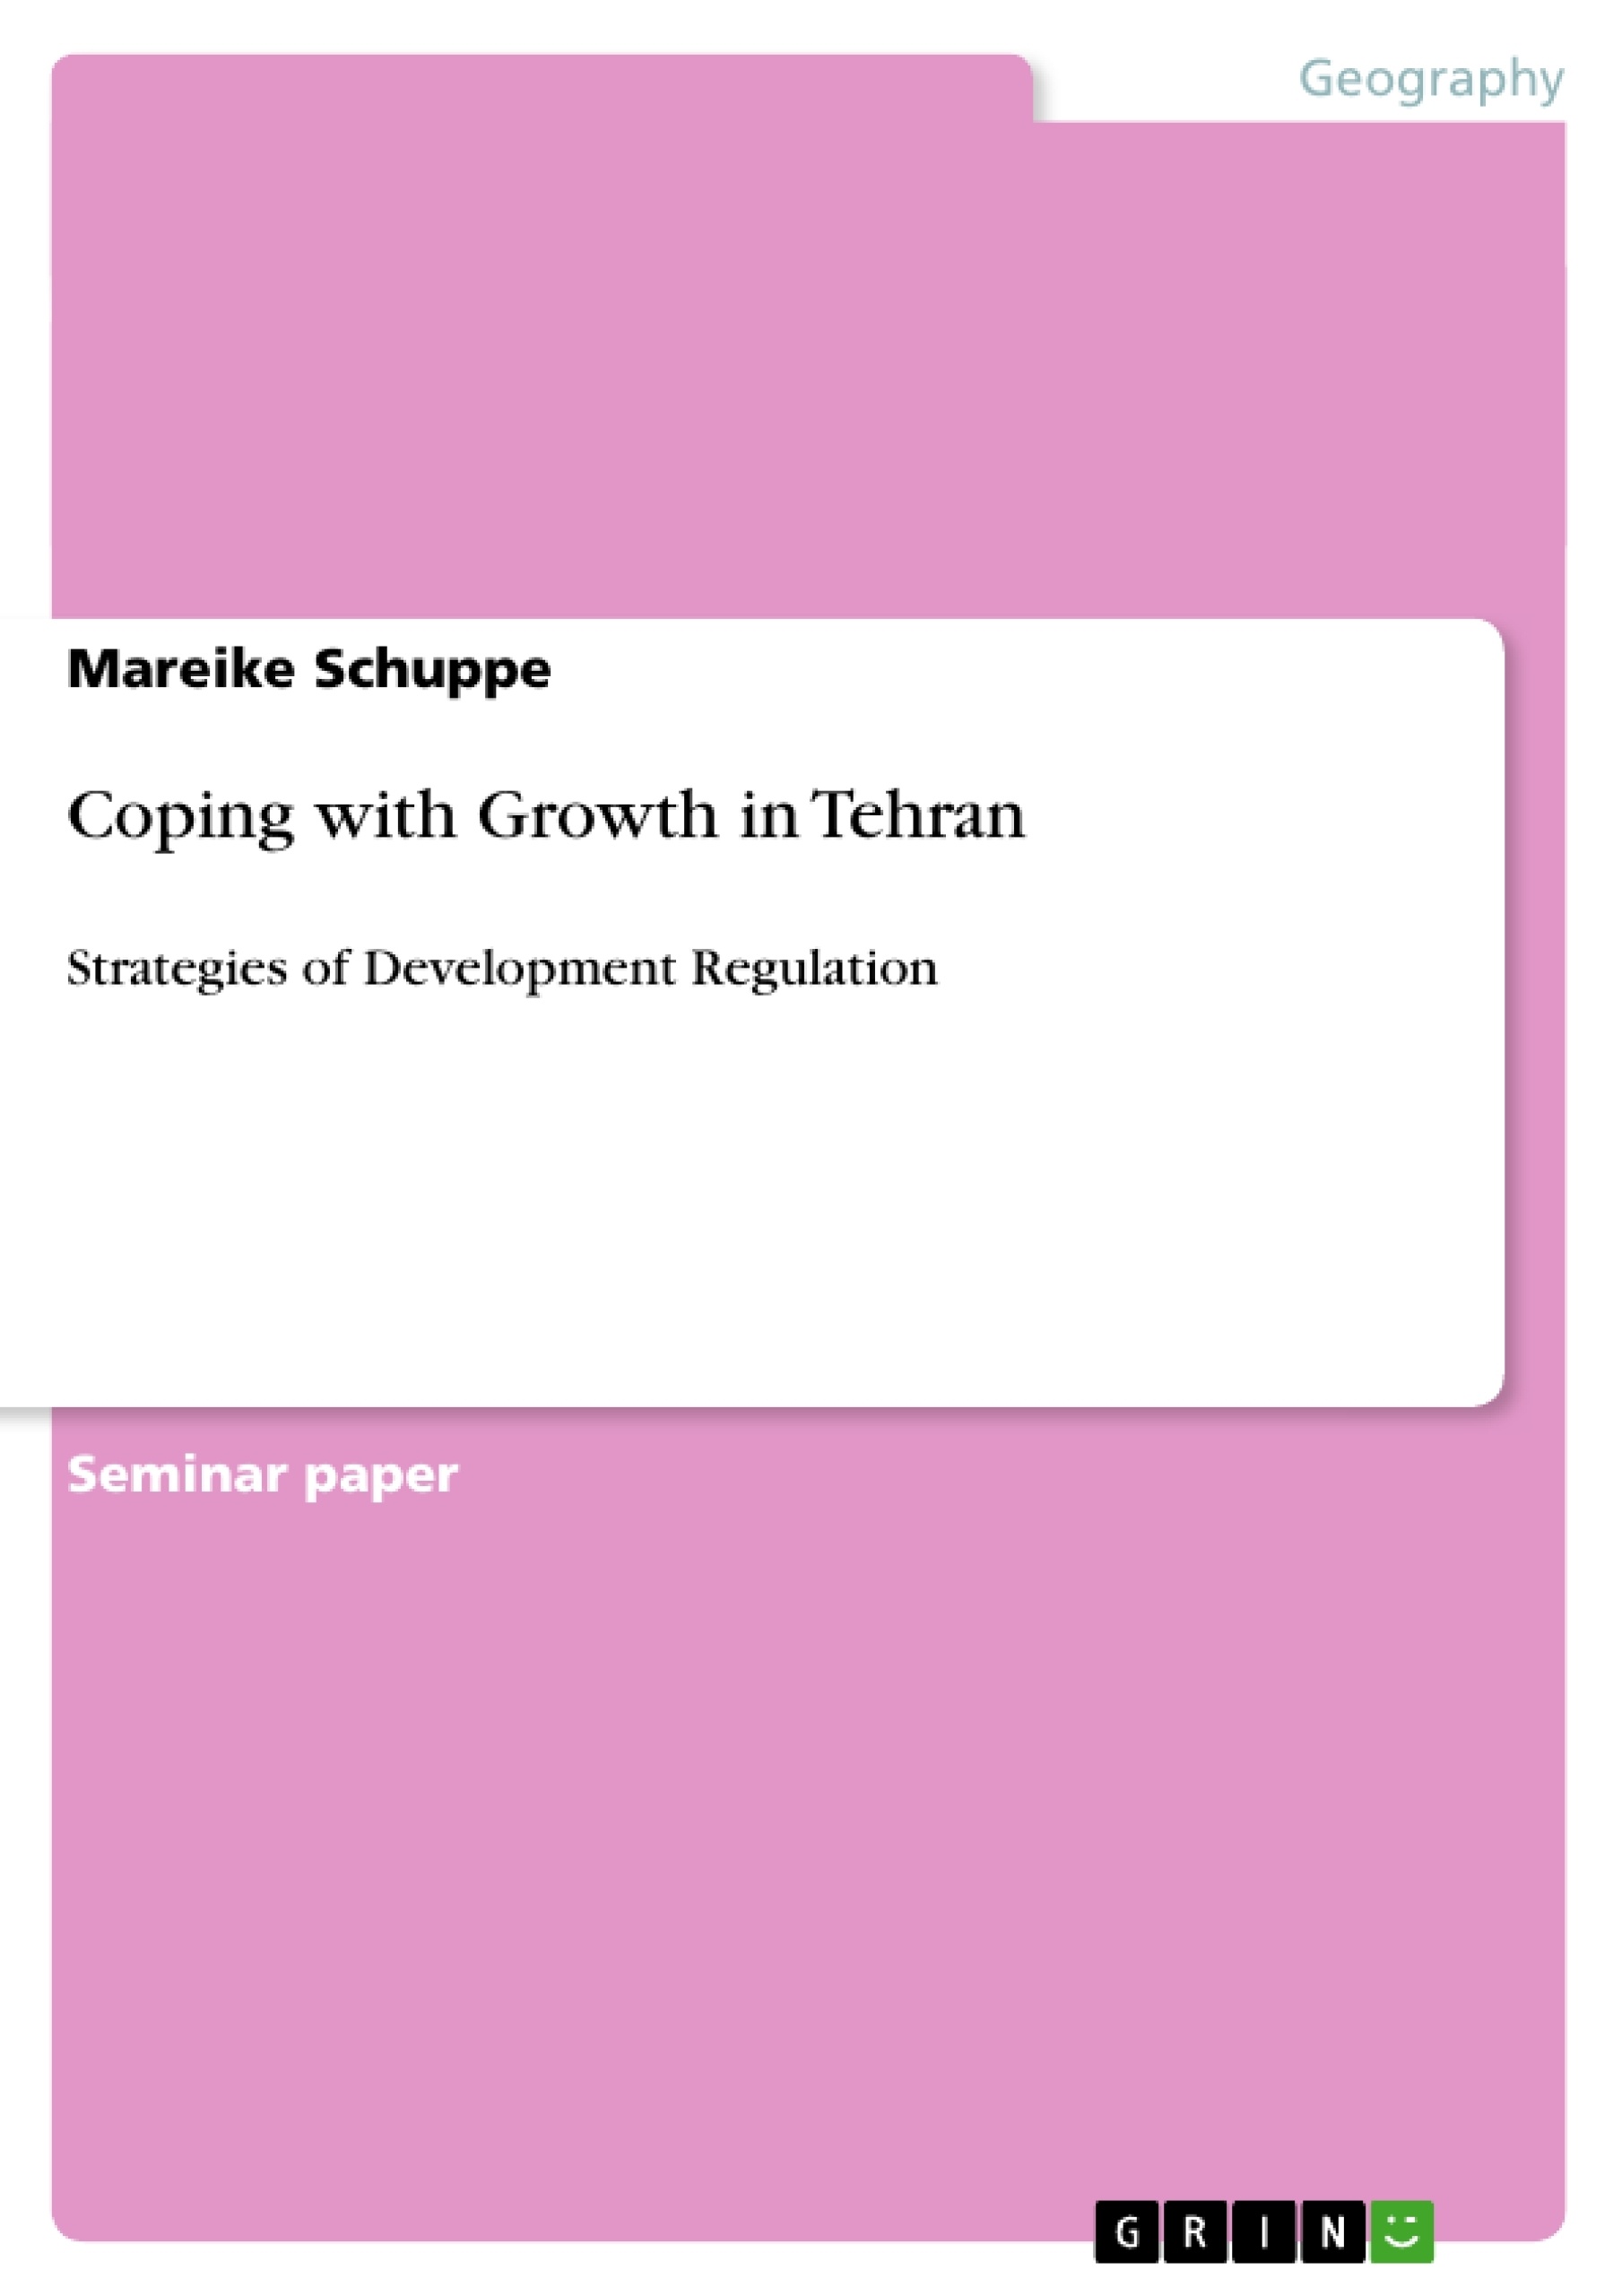 Title: Coping with Growth in Tehran